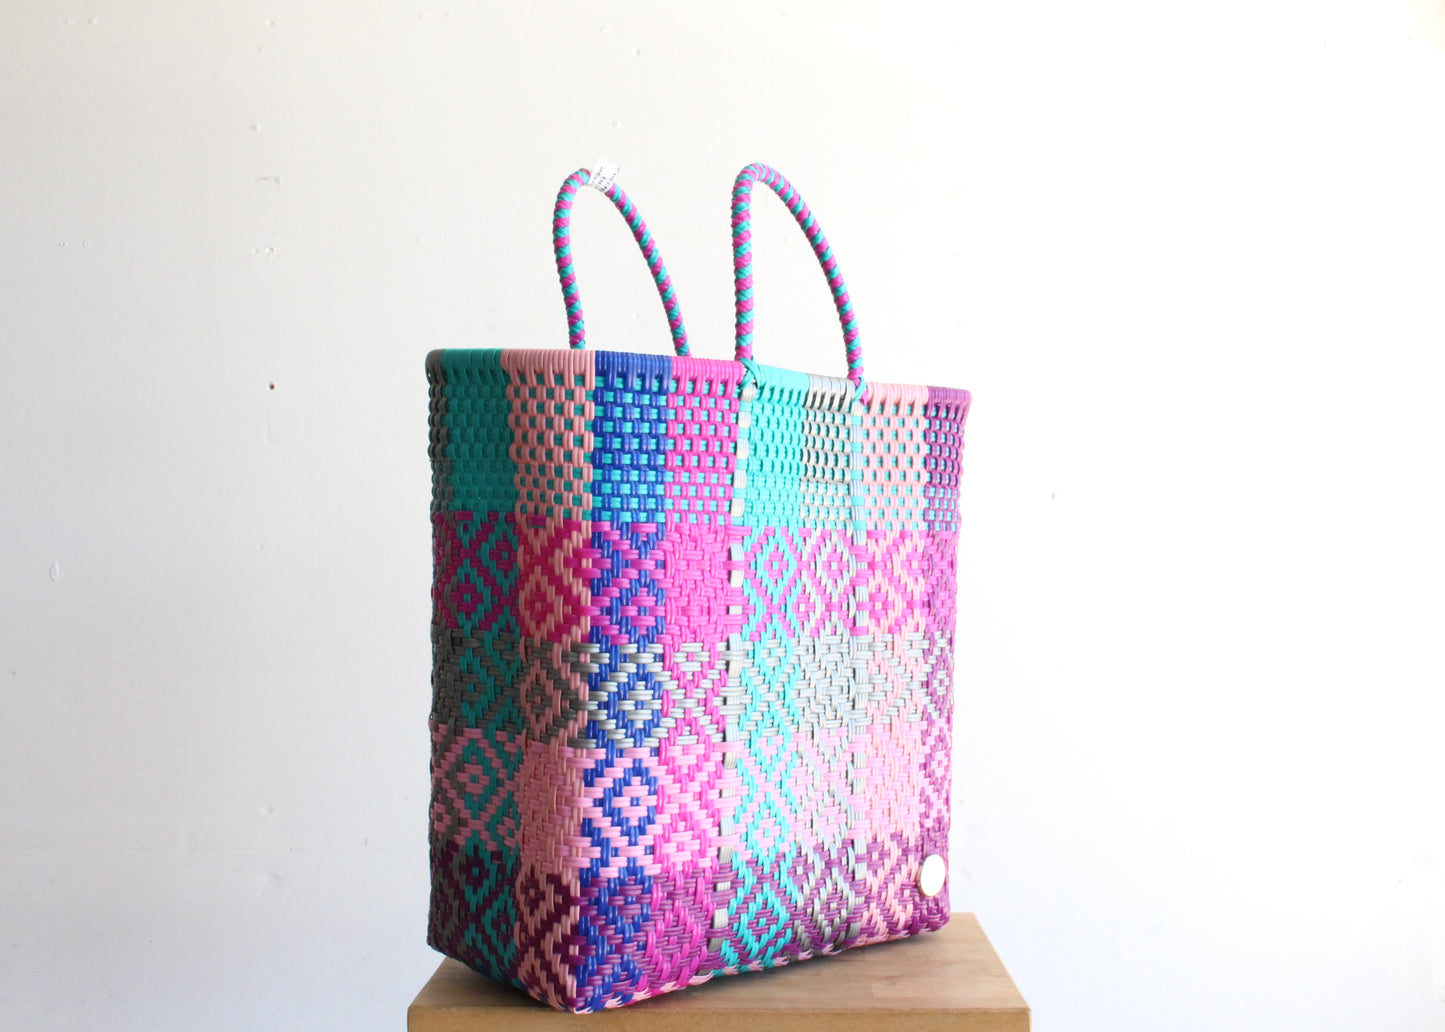 Colorful Handwoven Mexican Tote by MexiMexi